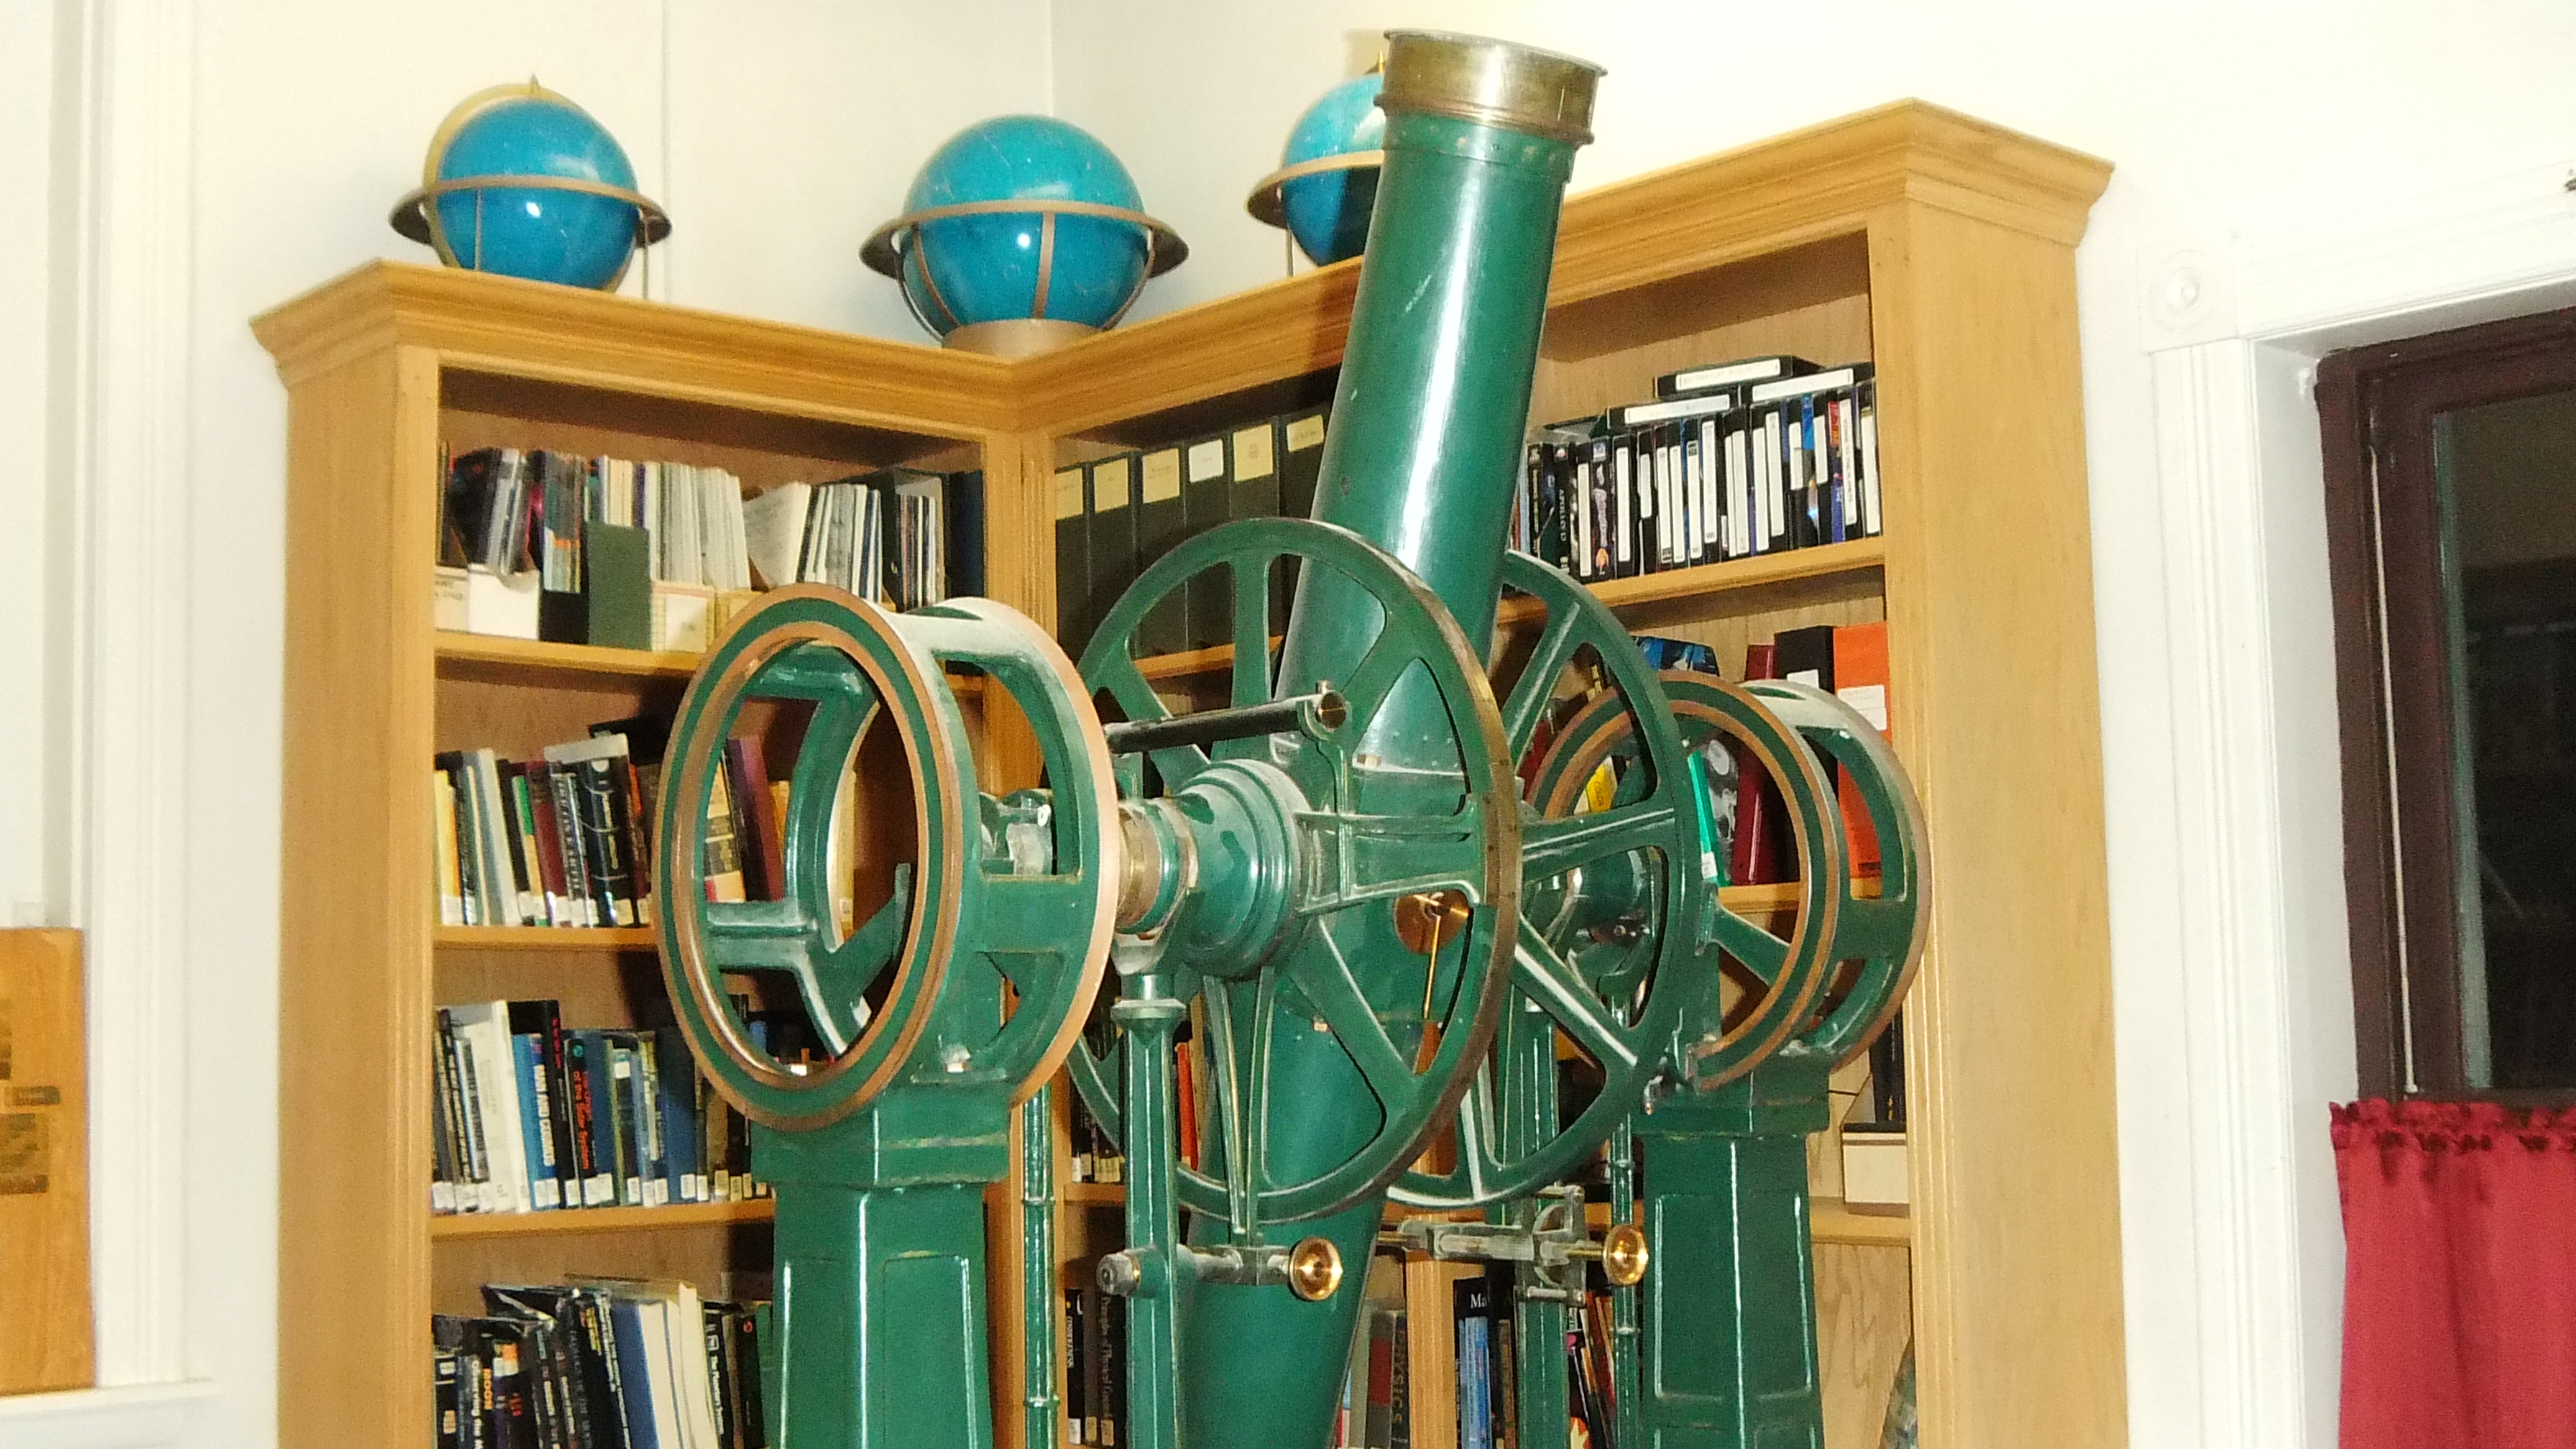 This Kind of Telescope Kept Trains Running